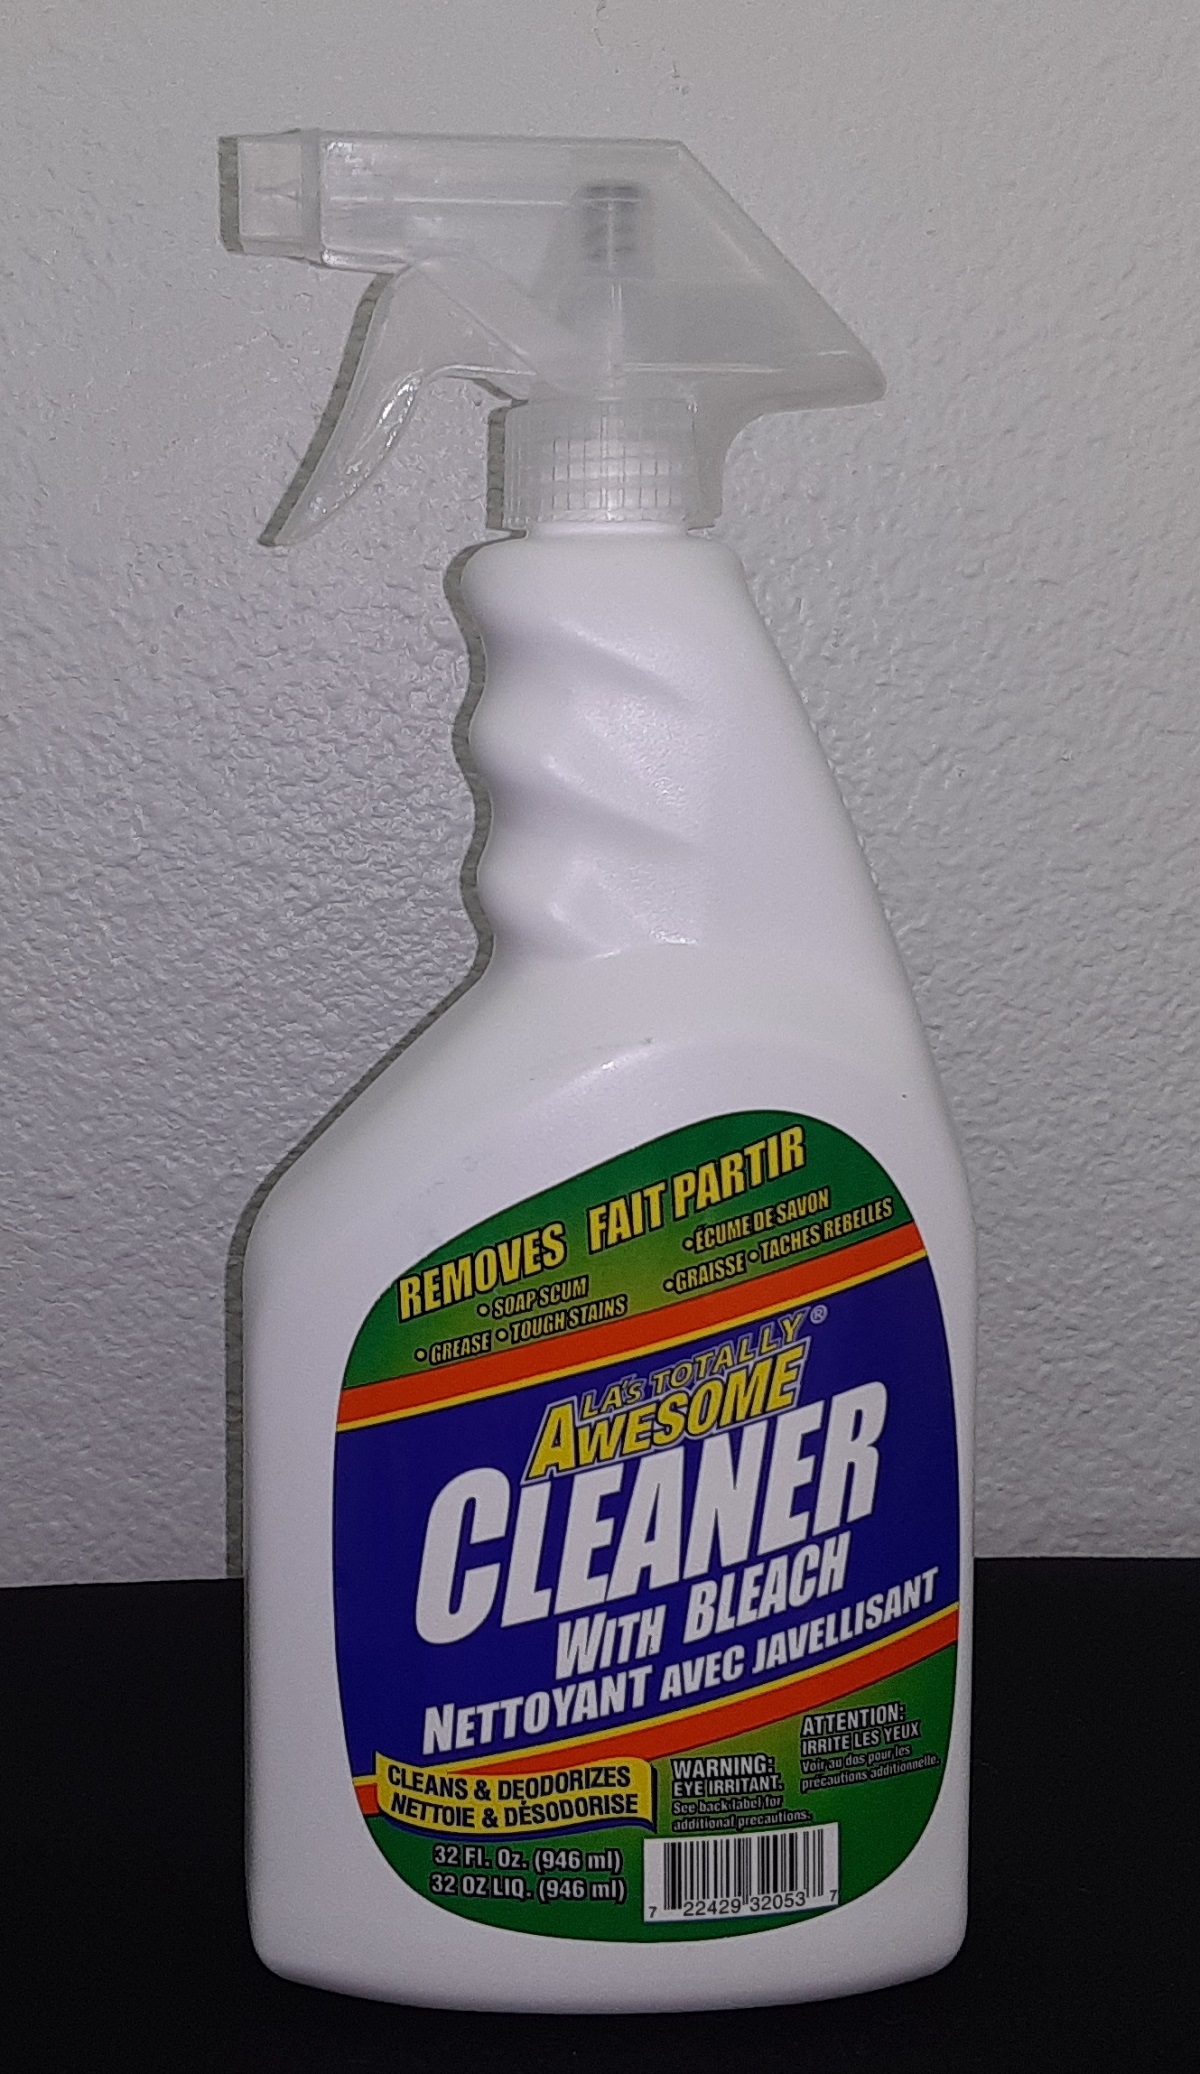 LA's Totally Awesome Cleaner with Bleach Removes Soap Scum, Grease - Tough Stains Cleans & Deodorizes